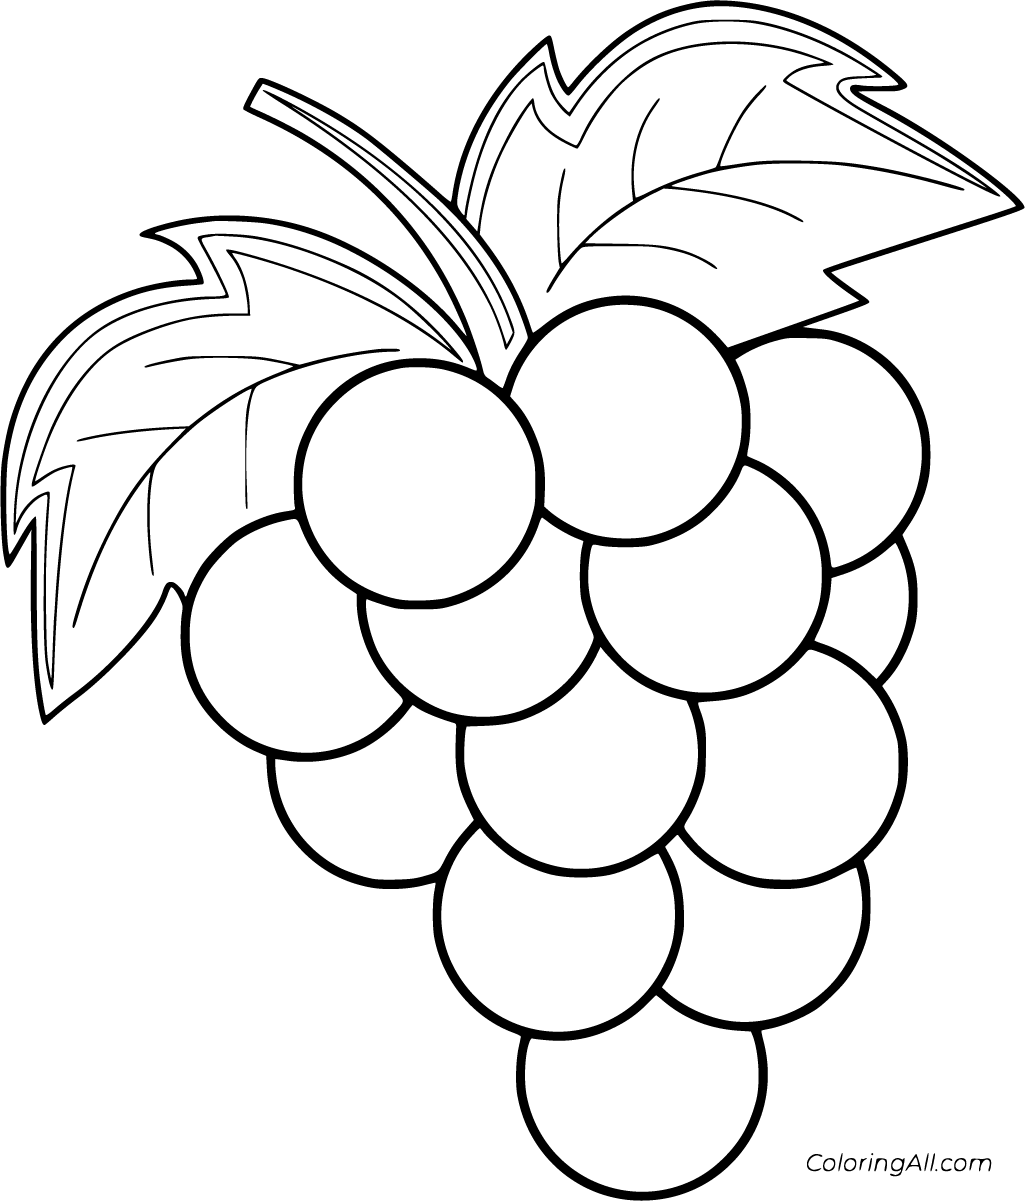 Indexme: Coloring Picture For Grapes